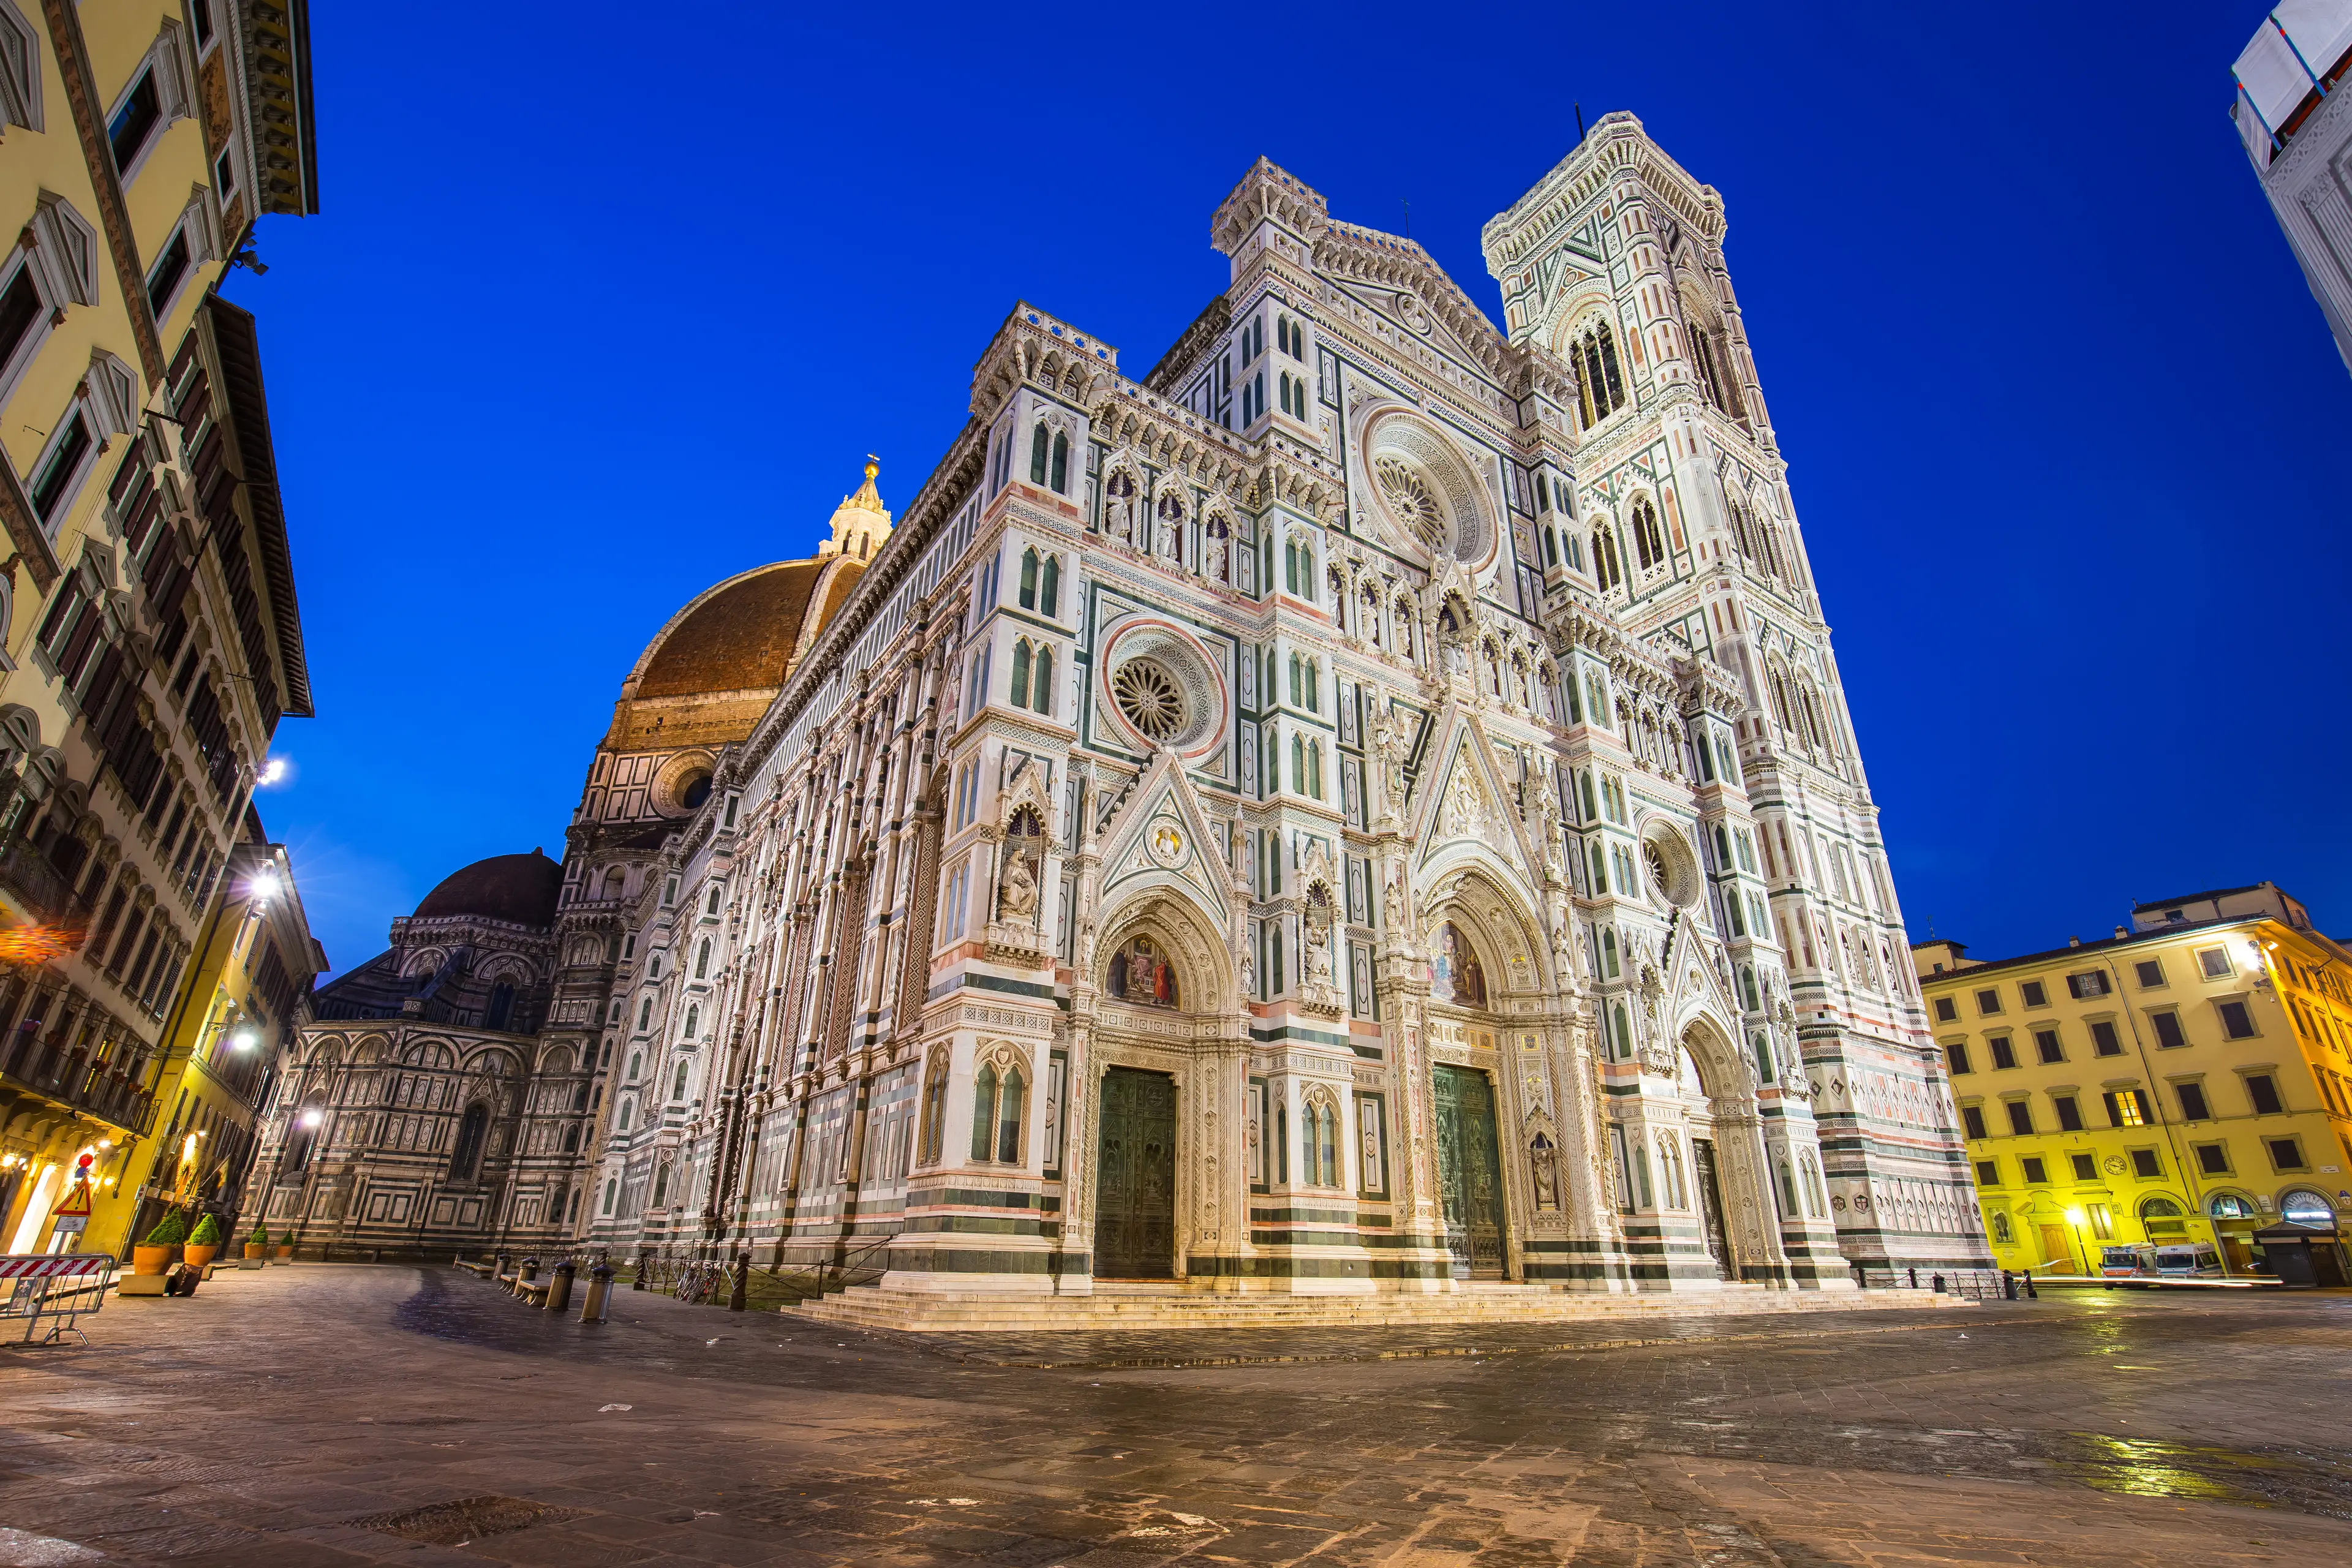 3-Day Ultimate Exploration Guide to Florence, Italy